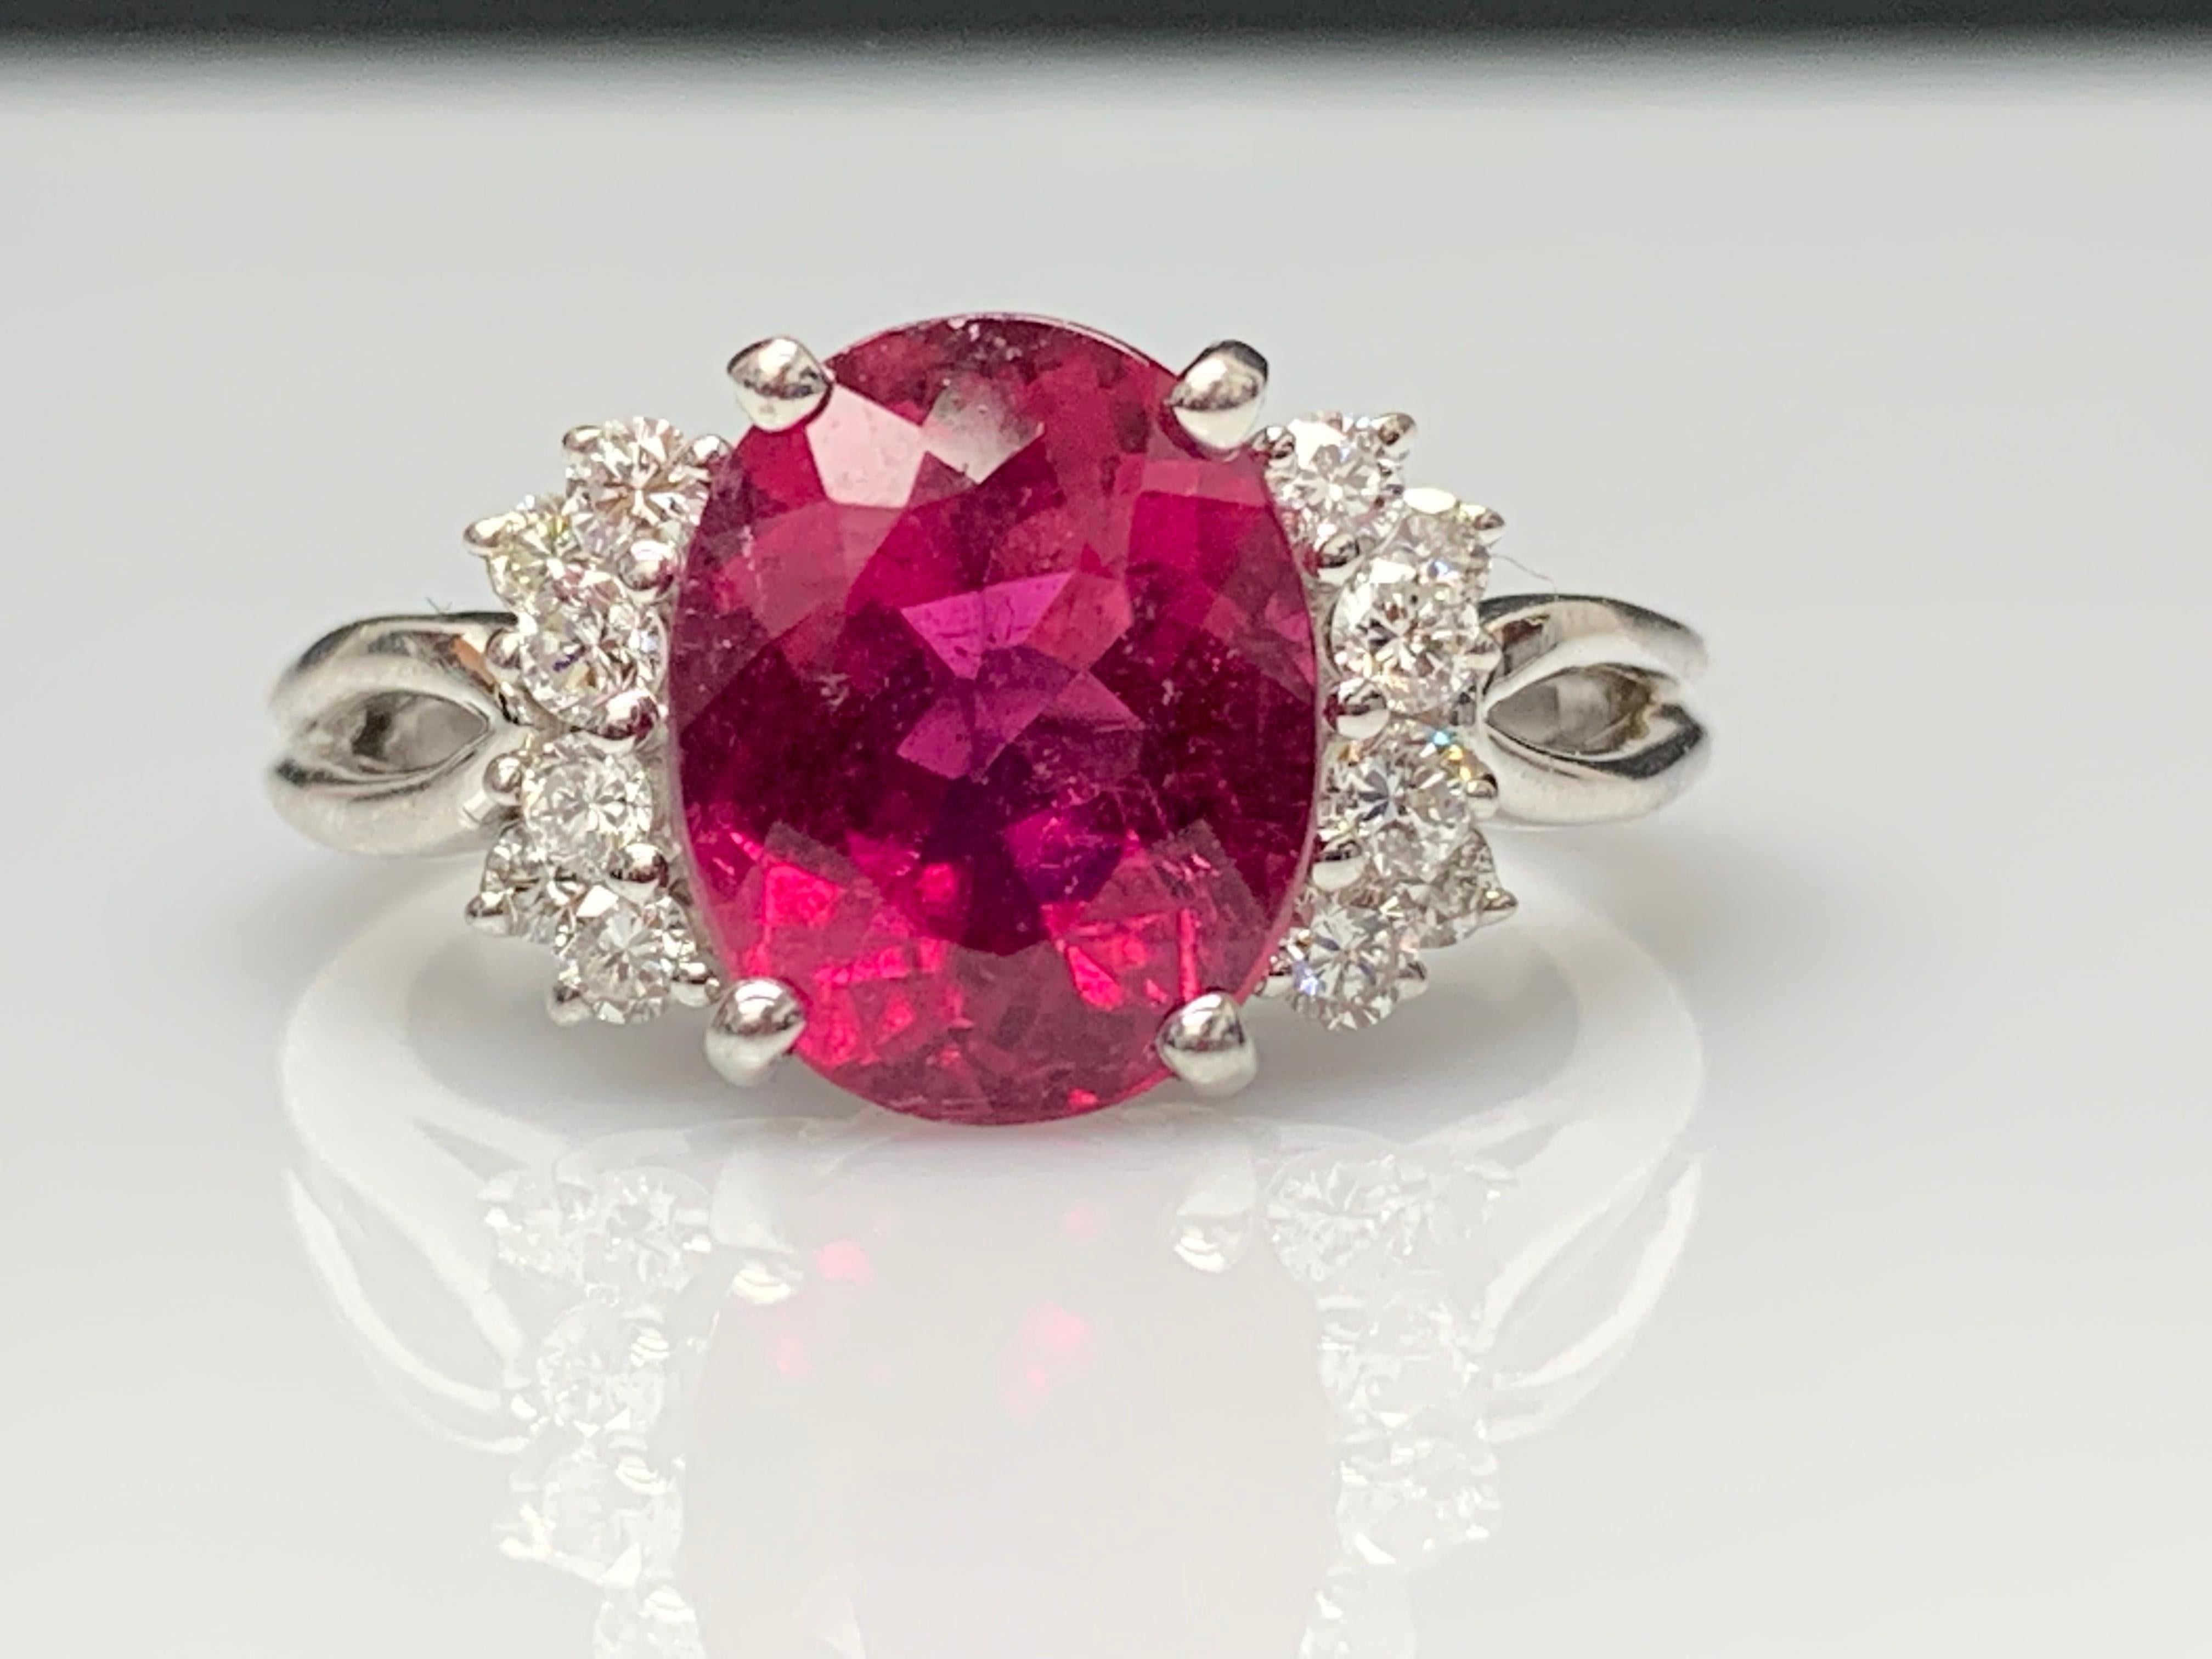 2.80 Carat Oval Cut Pink Tourmaline and Diamond Ring in 18K White Gold For Sale 9